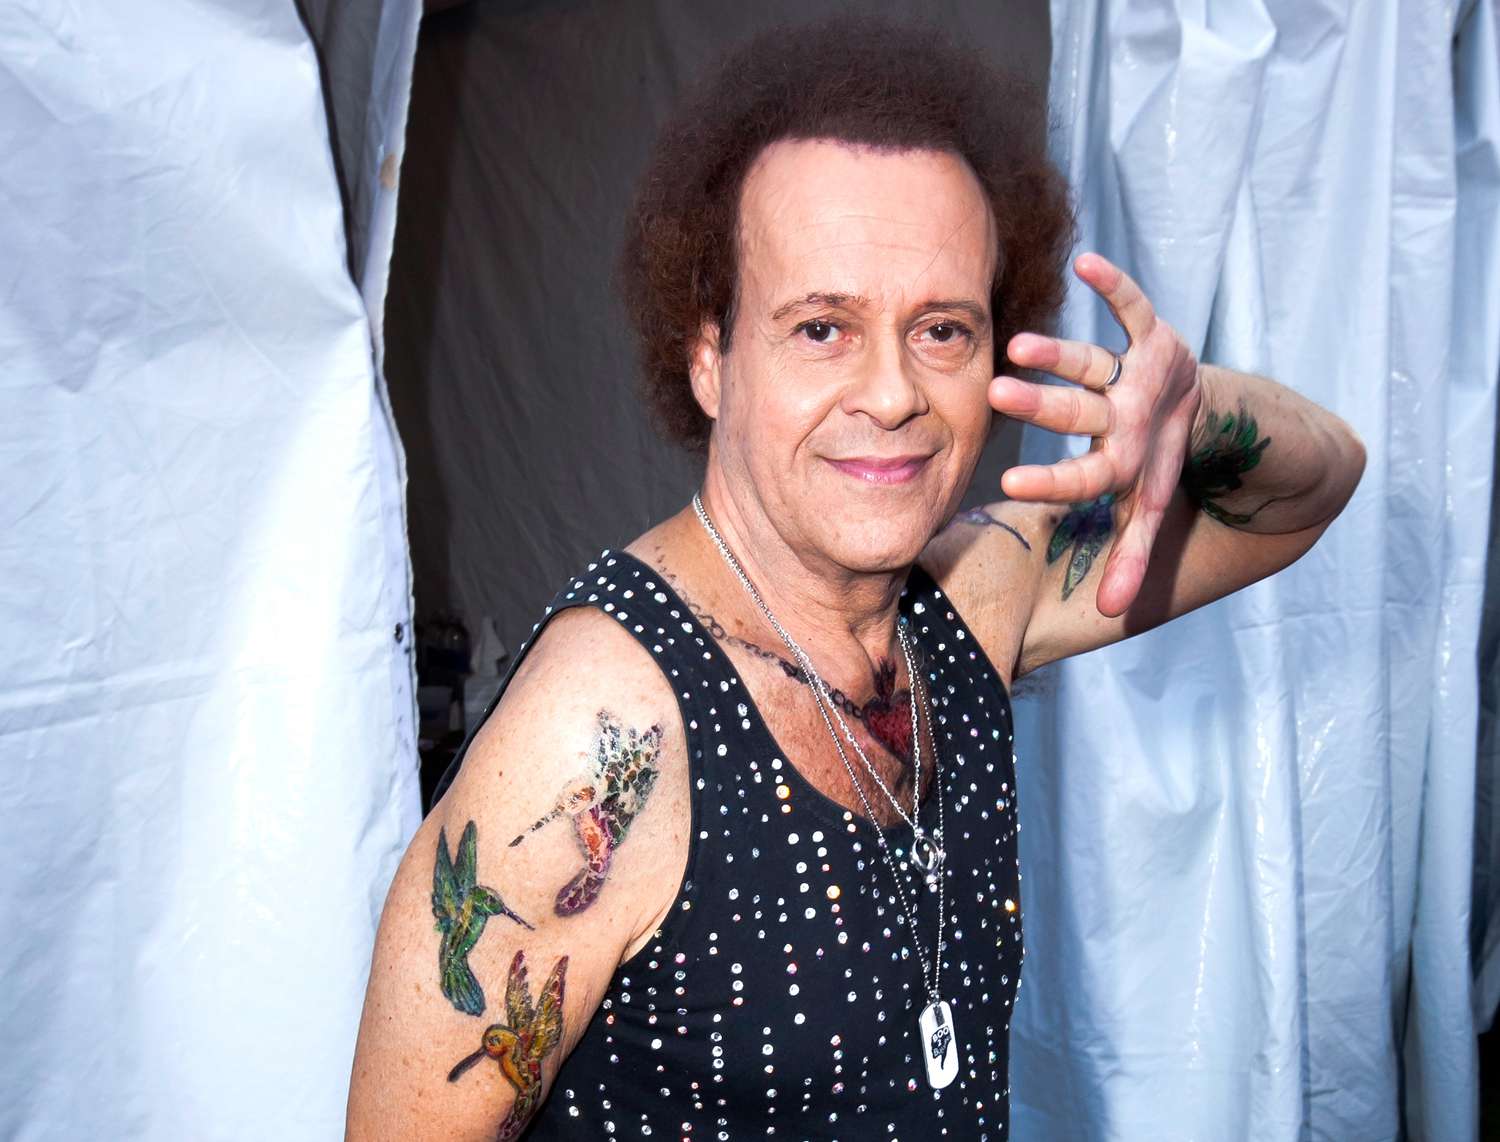 PEOPLE Readers Share Touching Stories About Their Own Encounters with Richard Simmons: 'He Truly Cared'